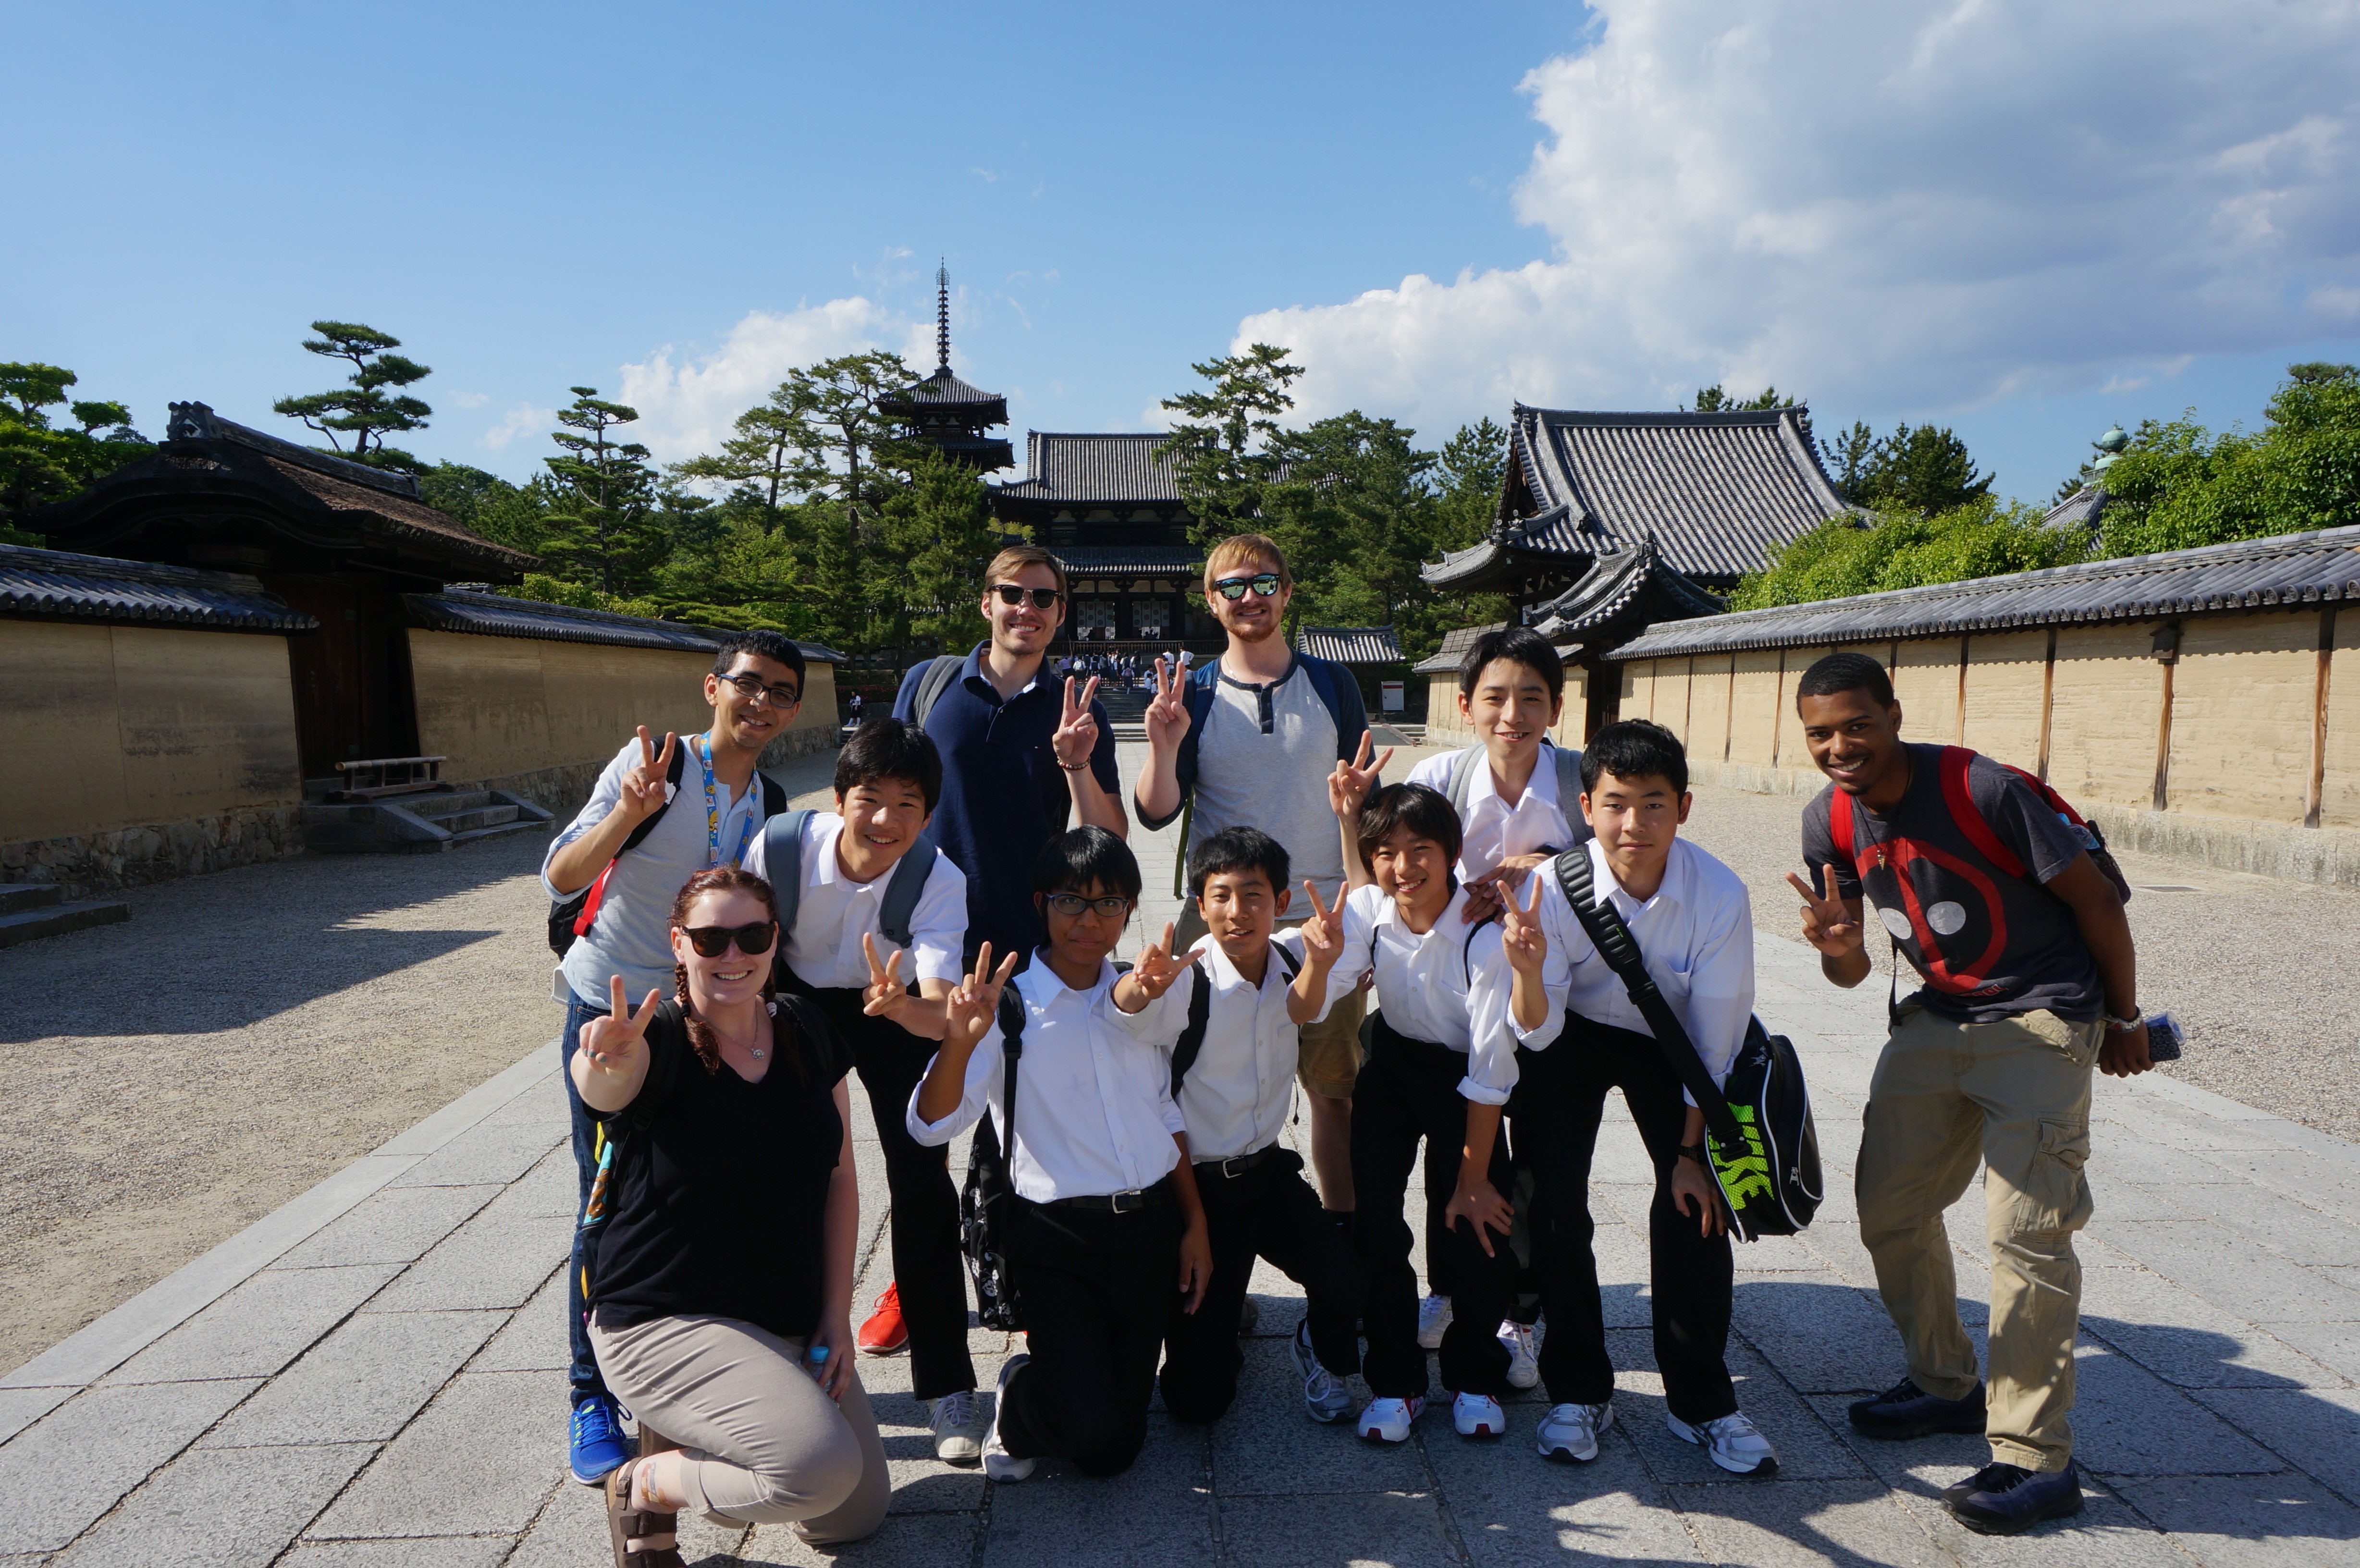 ISU geography students with local junior high students at Horyuji Temple near Nara. This temple is considered to be the oldest wooden structure on Earth, with tree-ring data putting its construction at more than 1300 years ago.